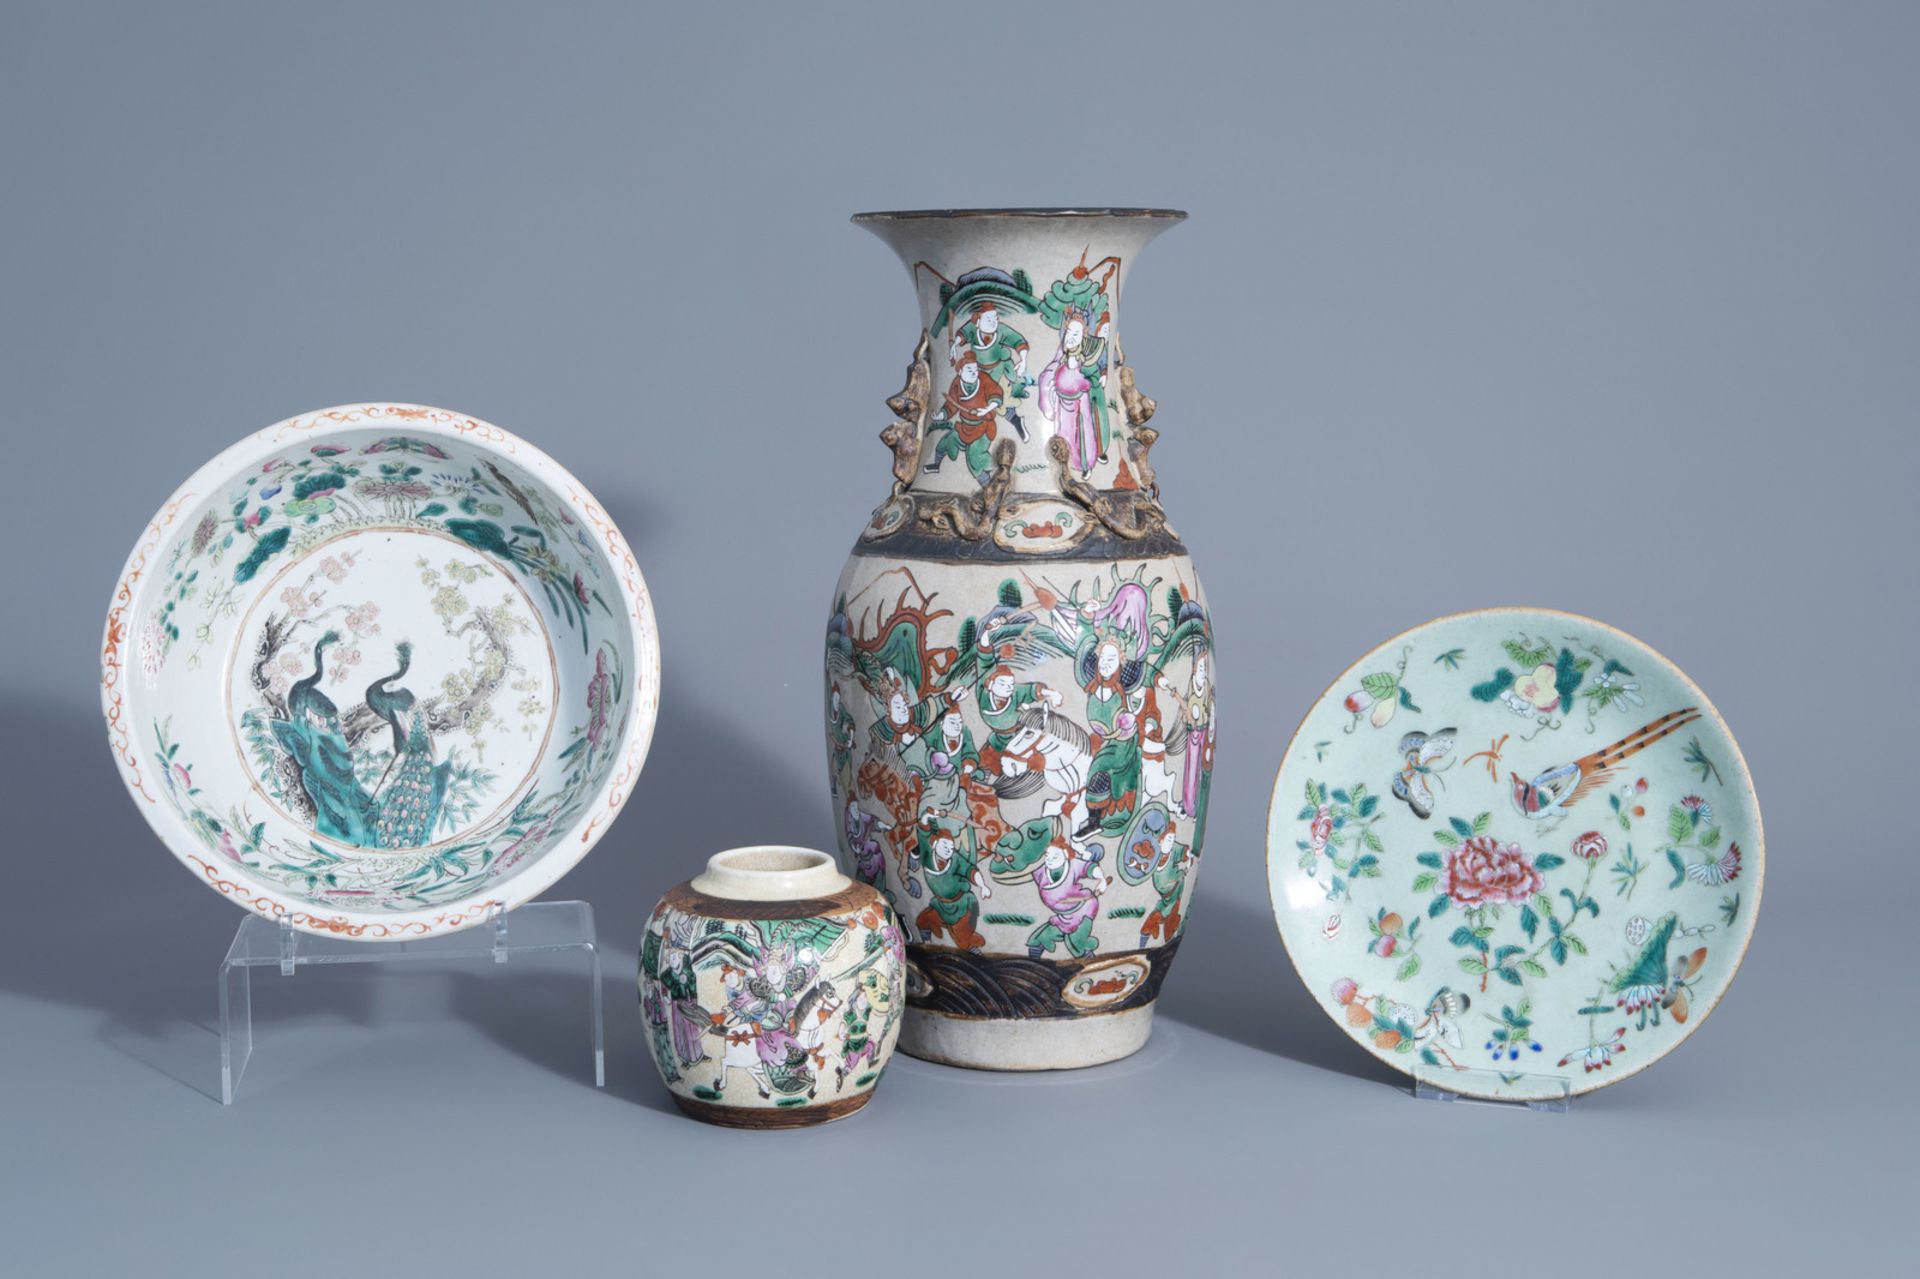 A varied collection of Chinese Nanking crackle glazed and famille rose porcelain, 19th C.